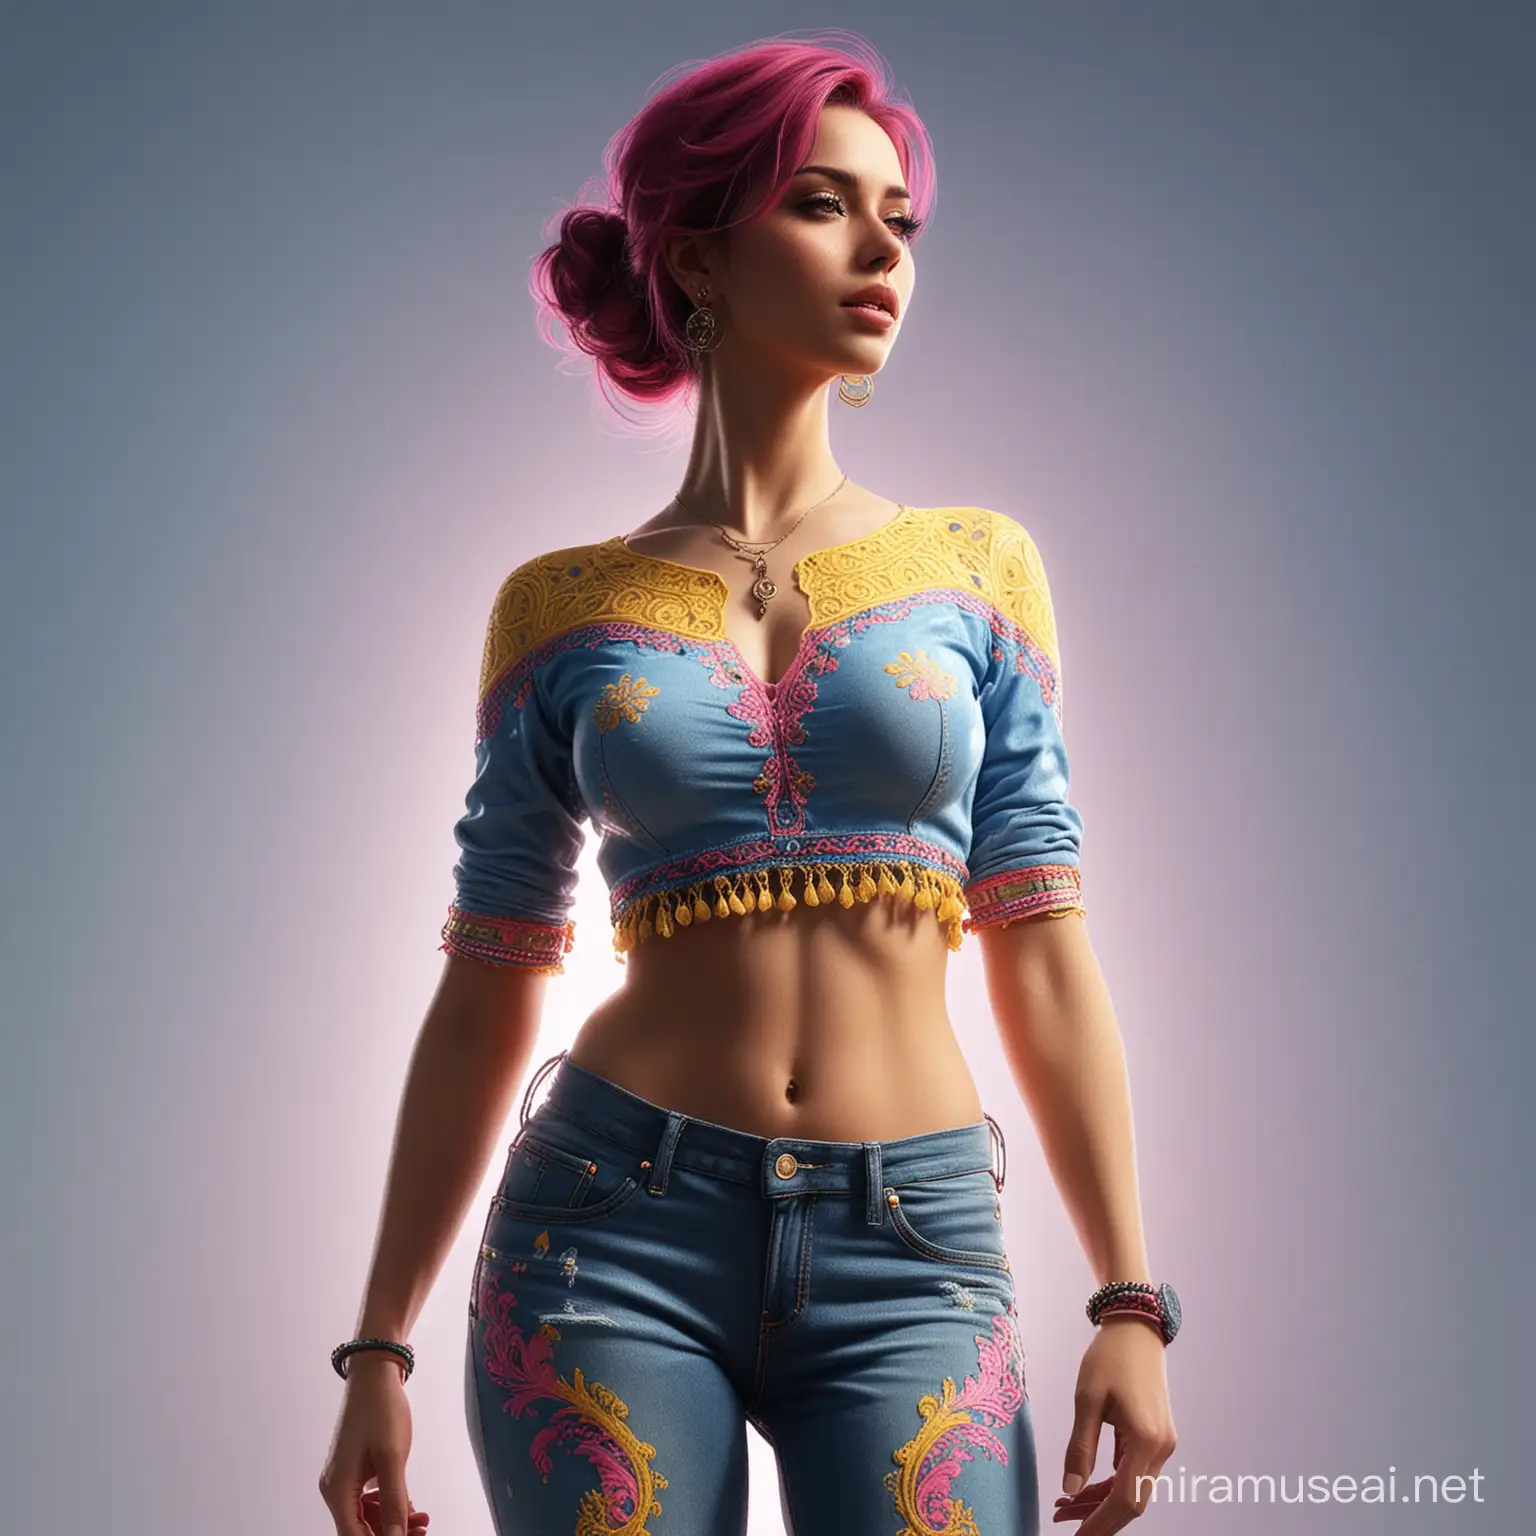 Silhouette of a Woman in ArabicInspired Croptop and Jeans with Translucent Body Art